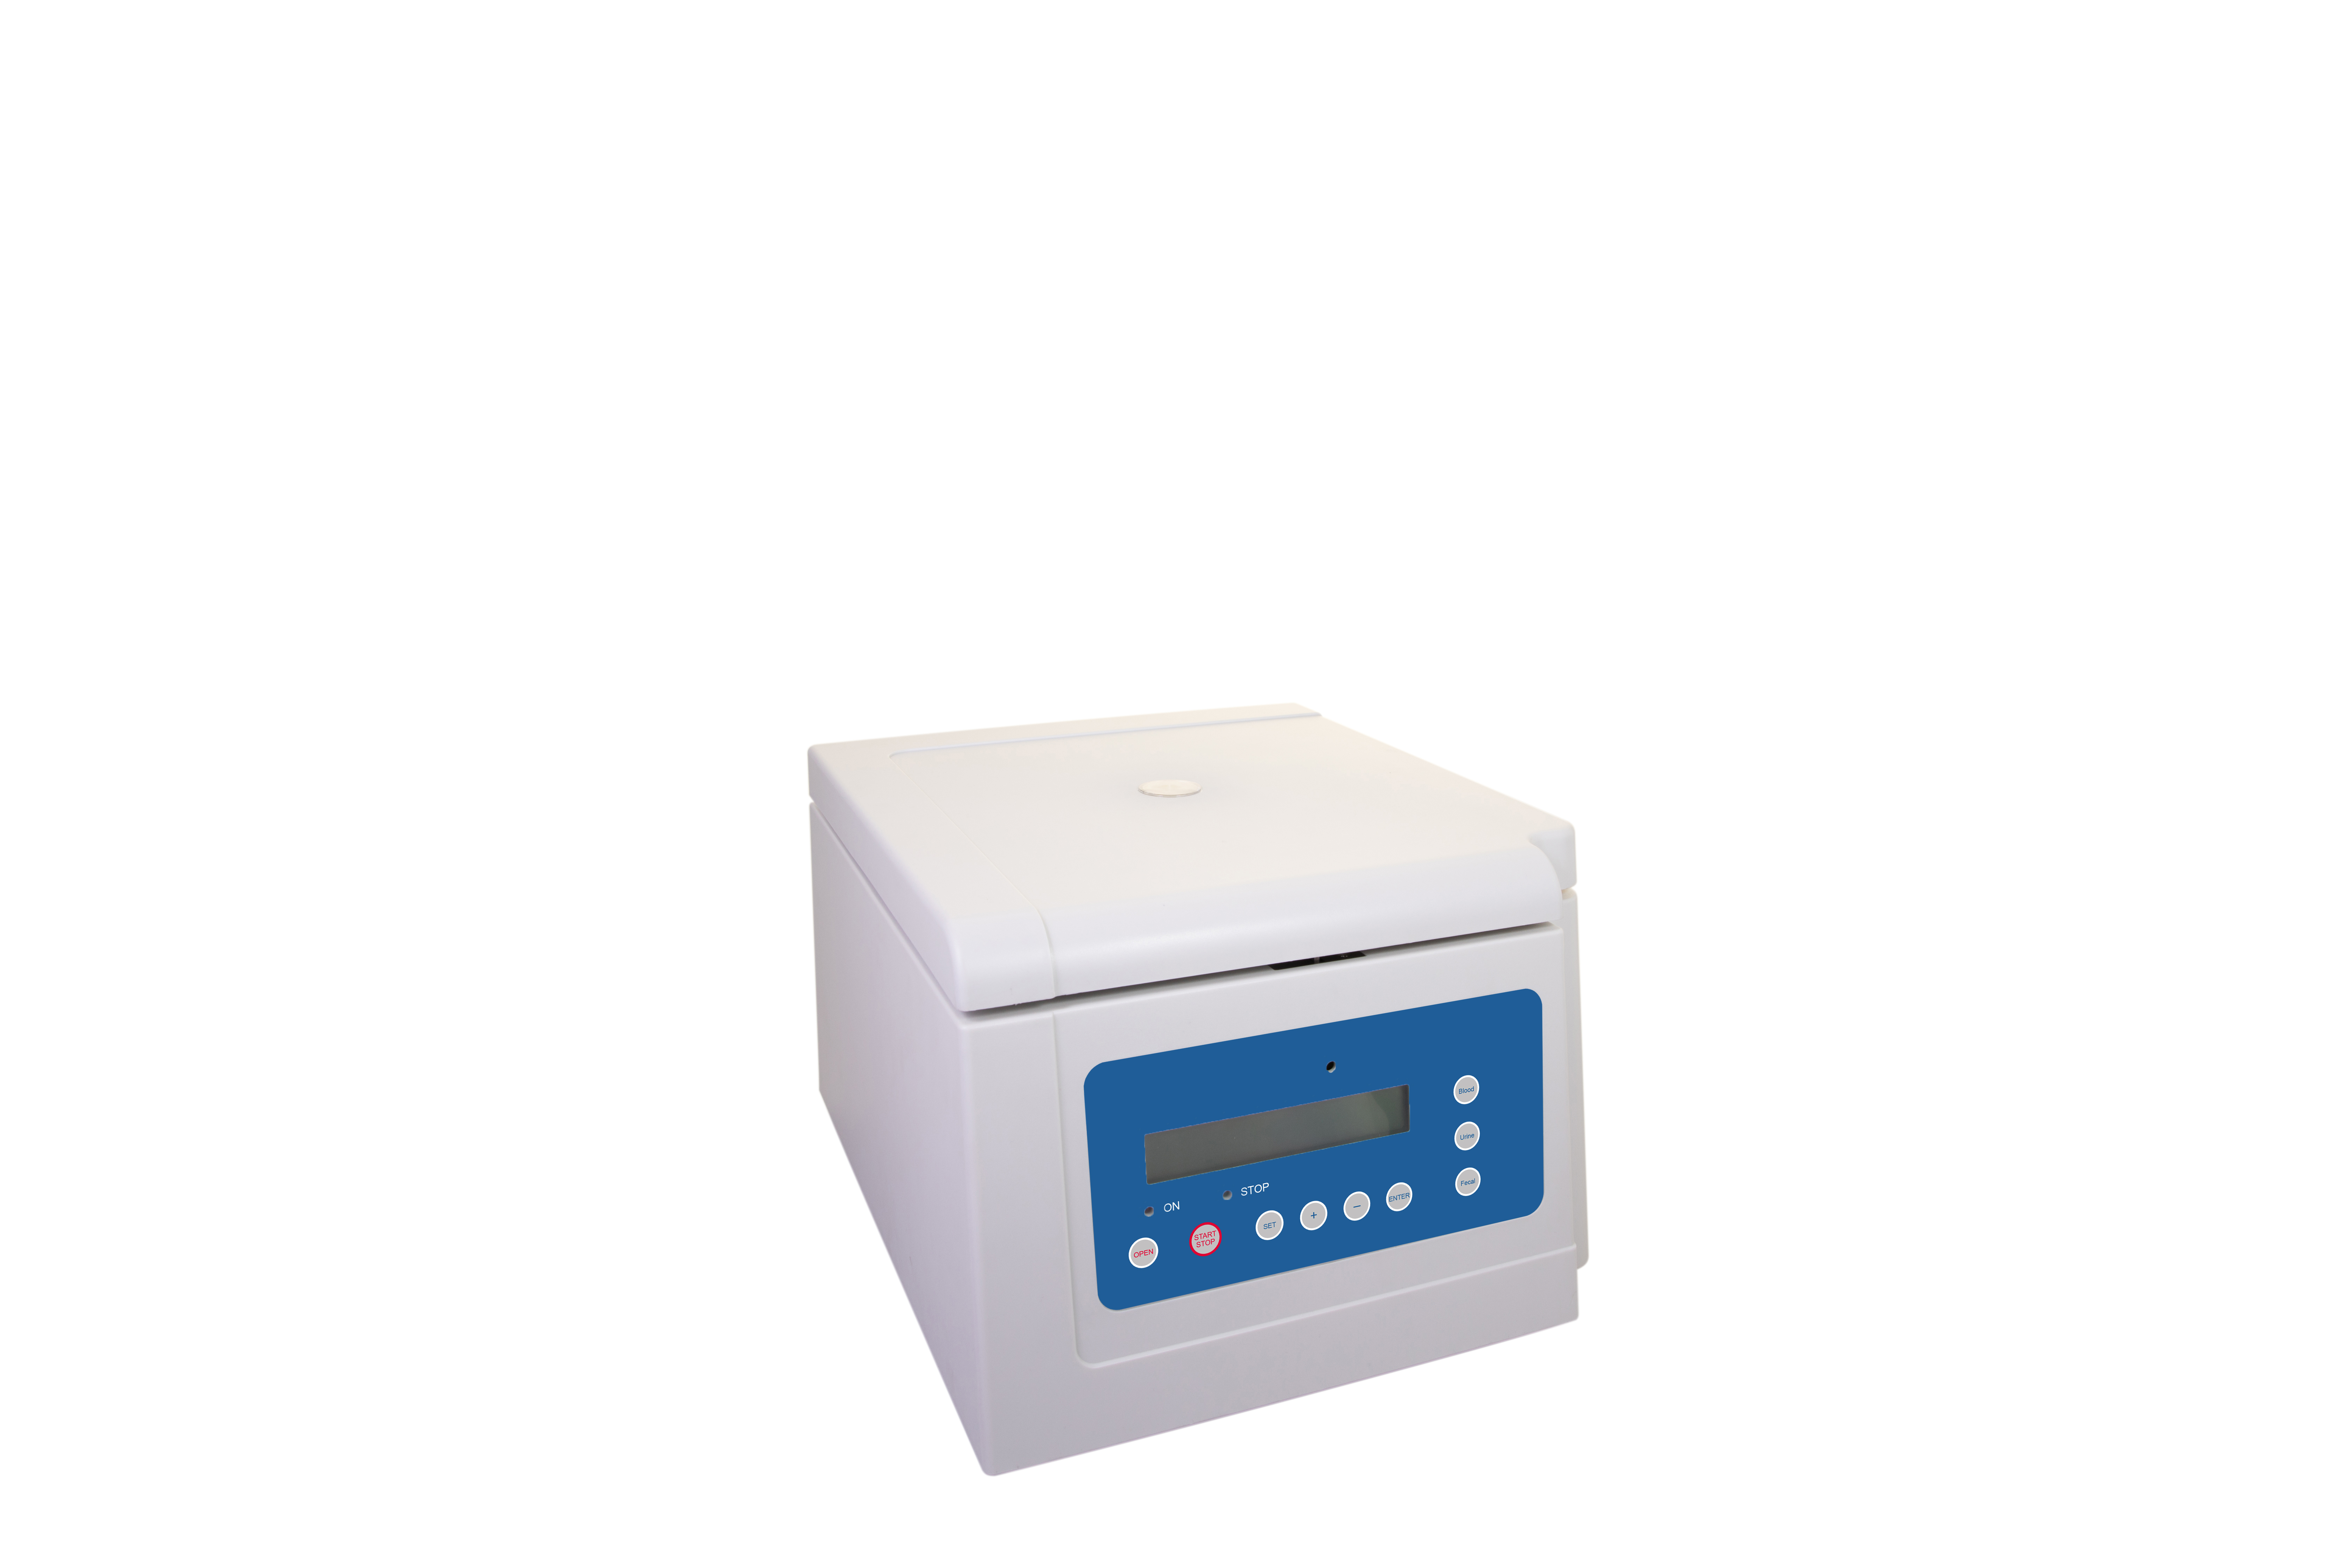 NADE DM0424 laboratory low speed 4000rpm LCD display Centrifuge for separation of serum, plasma , urine, fecal samples